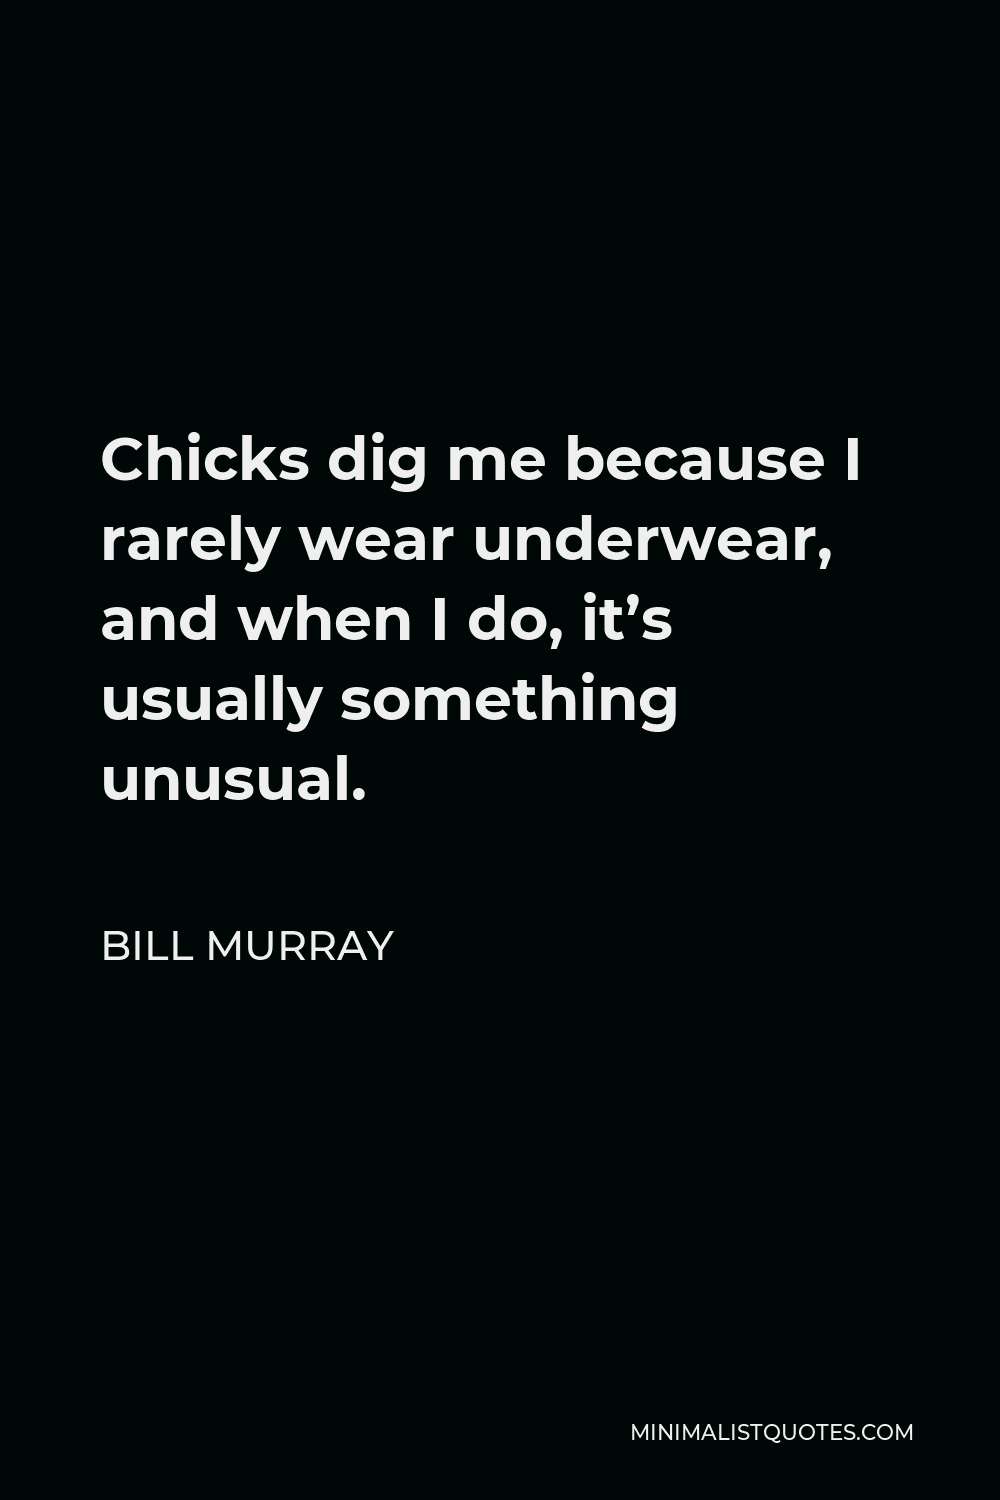 Bill Murray Quote - Chicks dig me because I rarely wear underwear, and when I do, it’s usually something unusual.